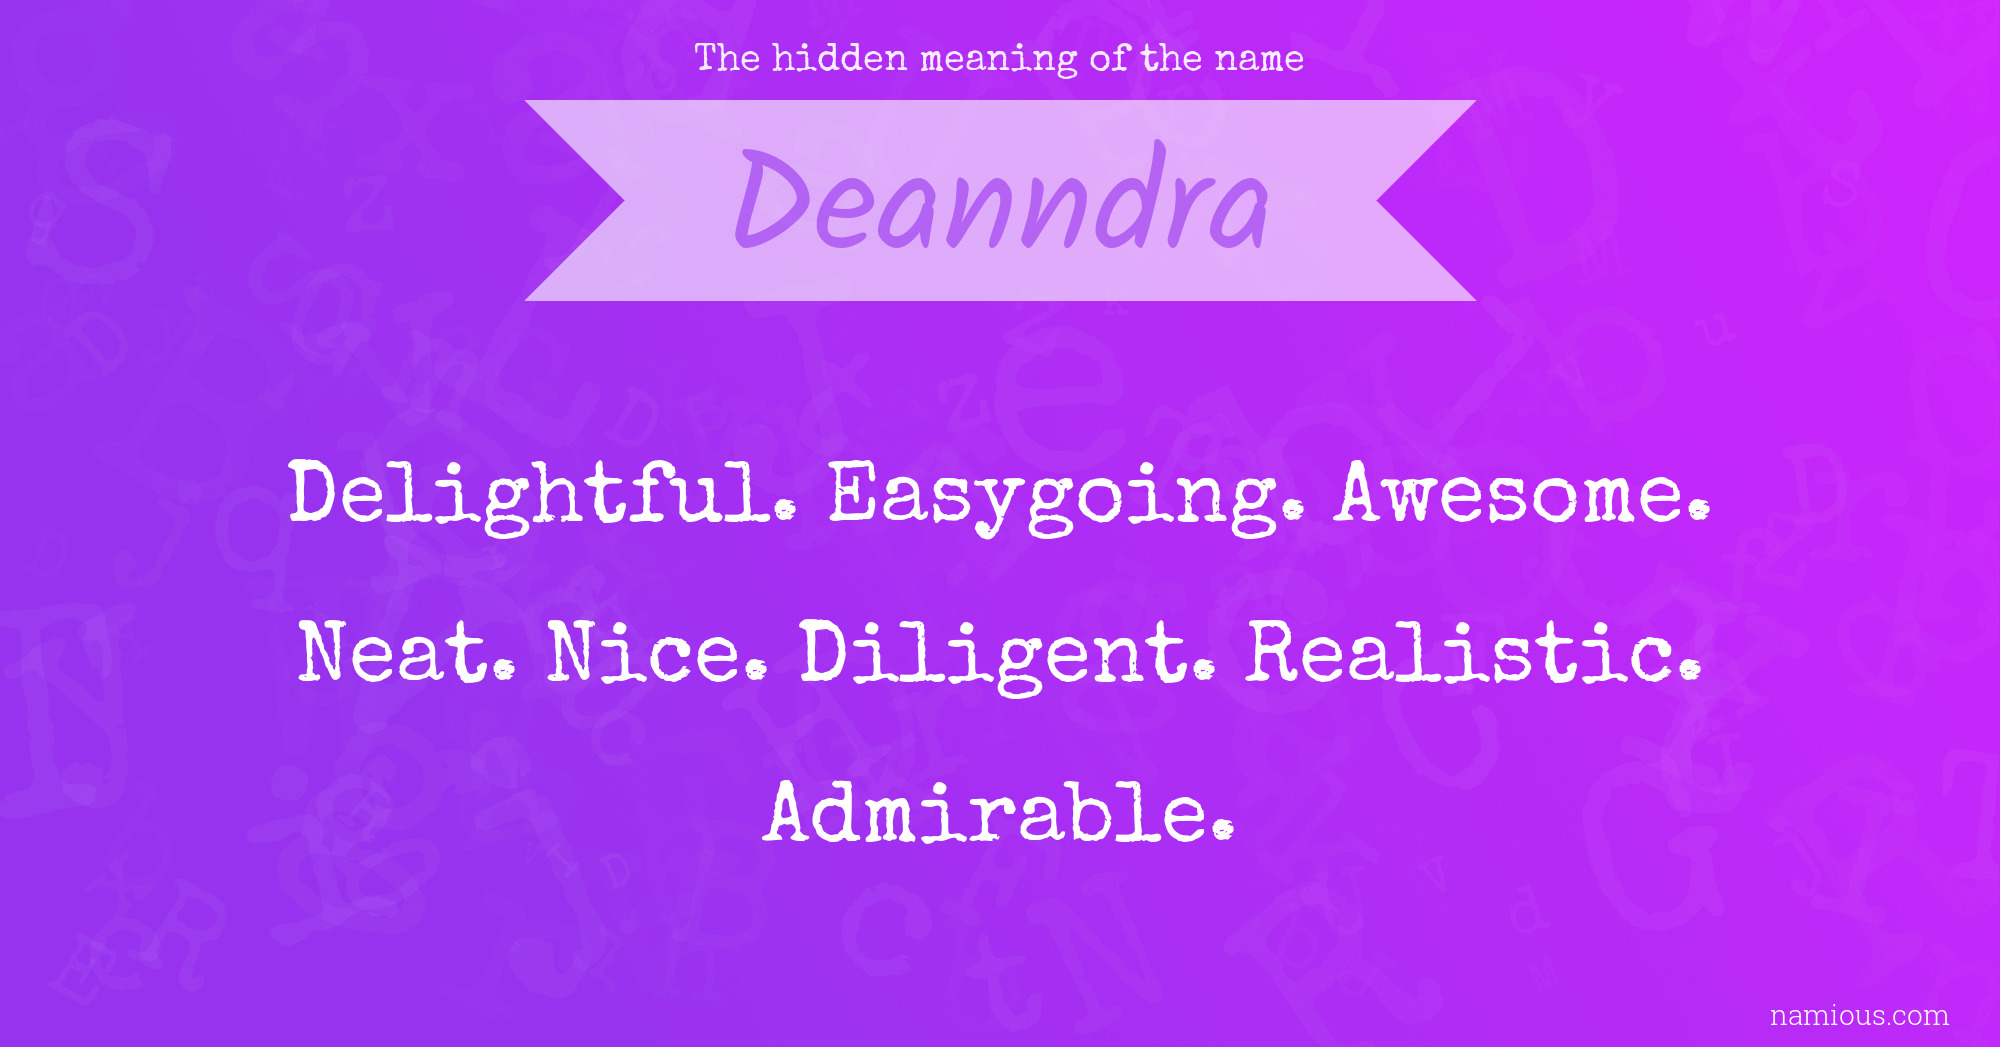 The hidden meaning of the name Deanndra